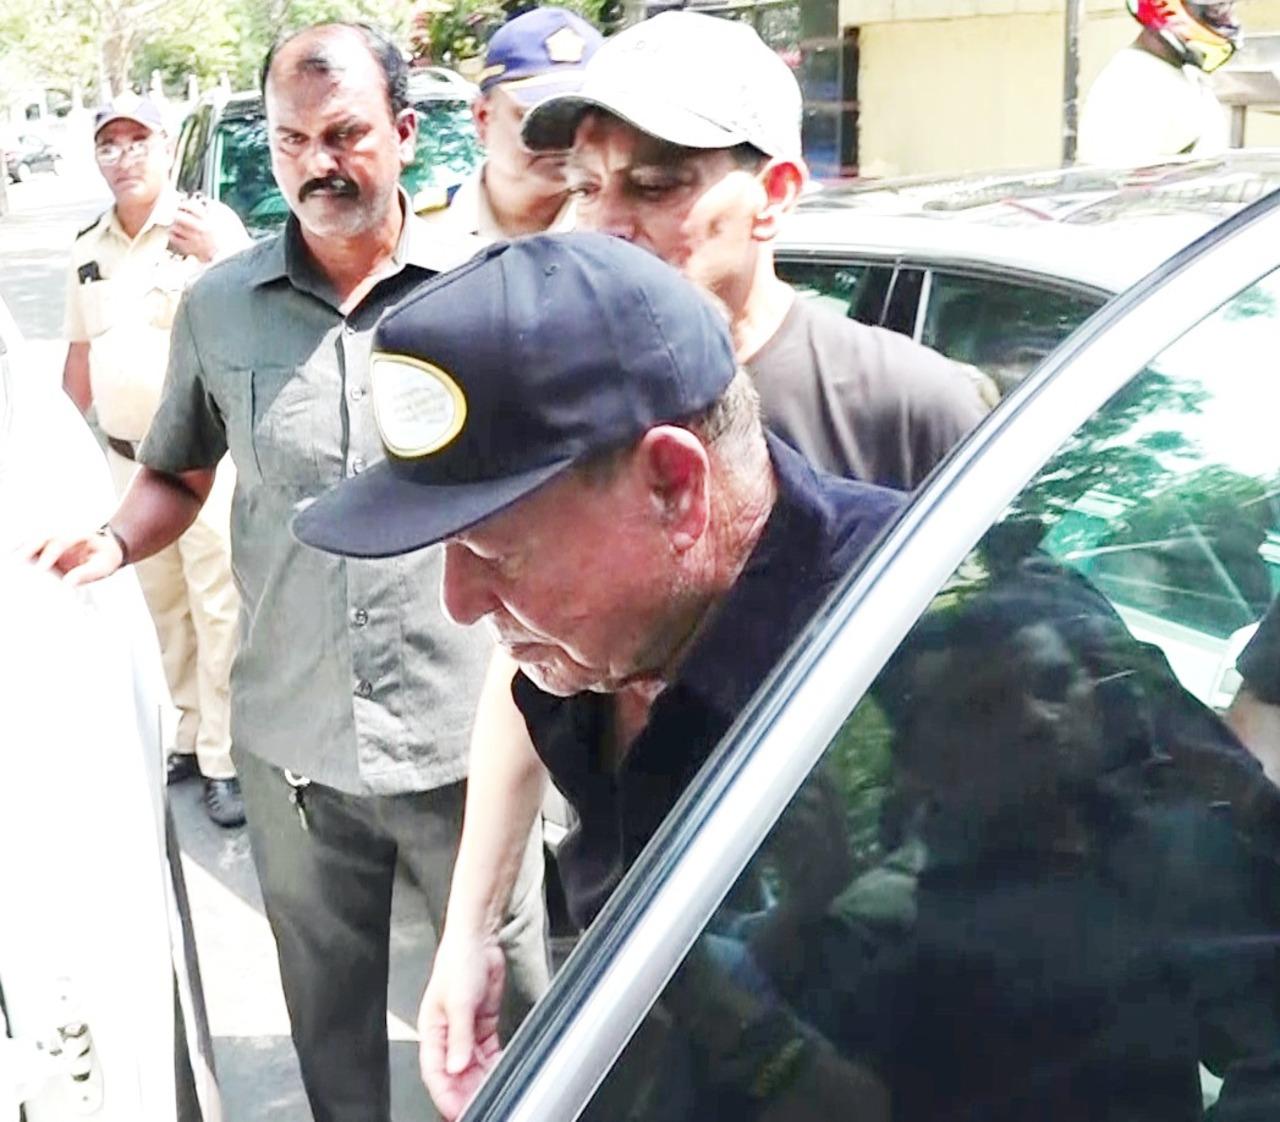 Salman Khan's father, veteran writer Salim Khan was also seen arriving at a polling booth in Bandra to cast his vote